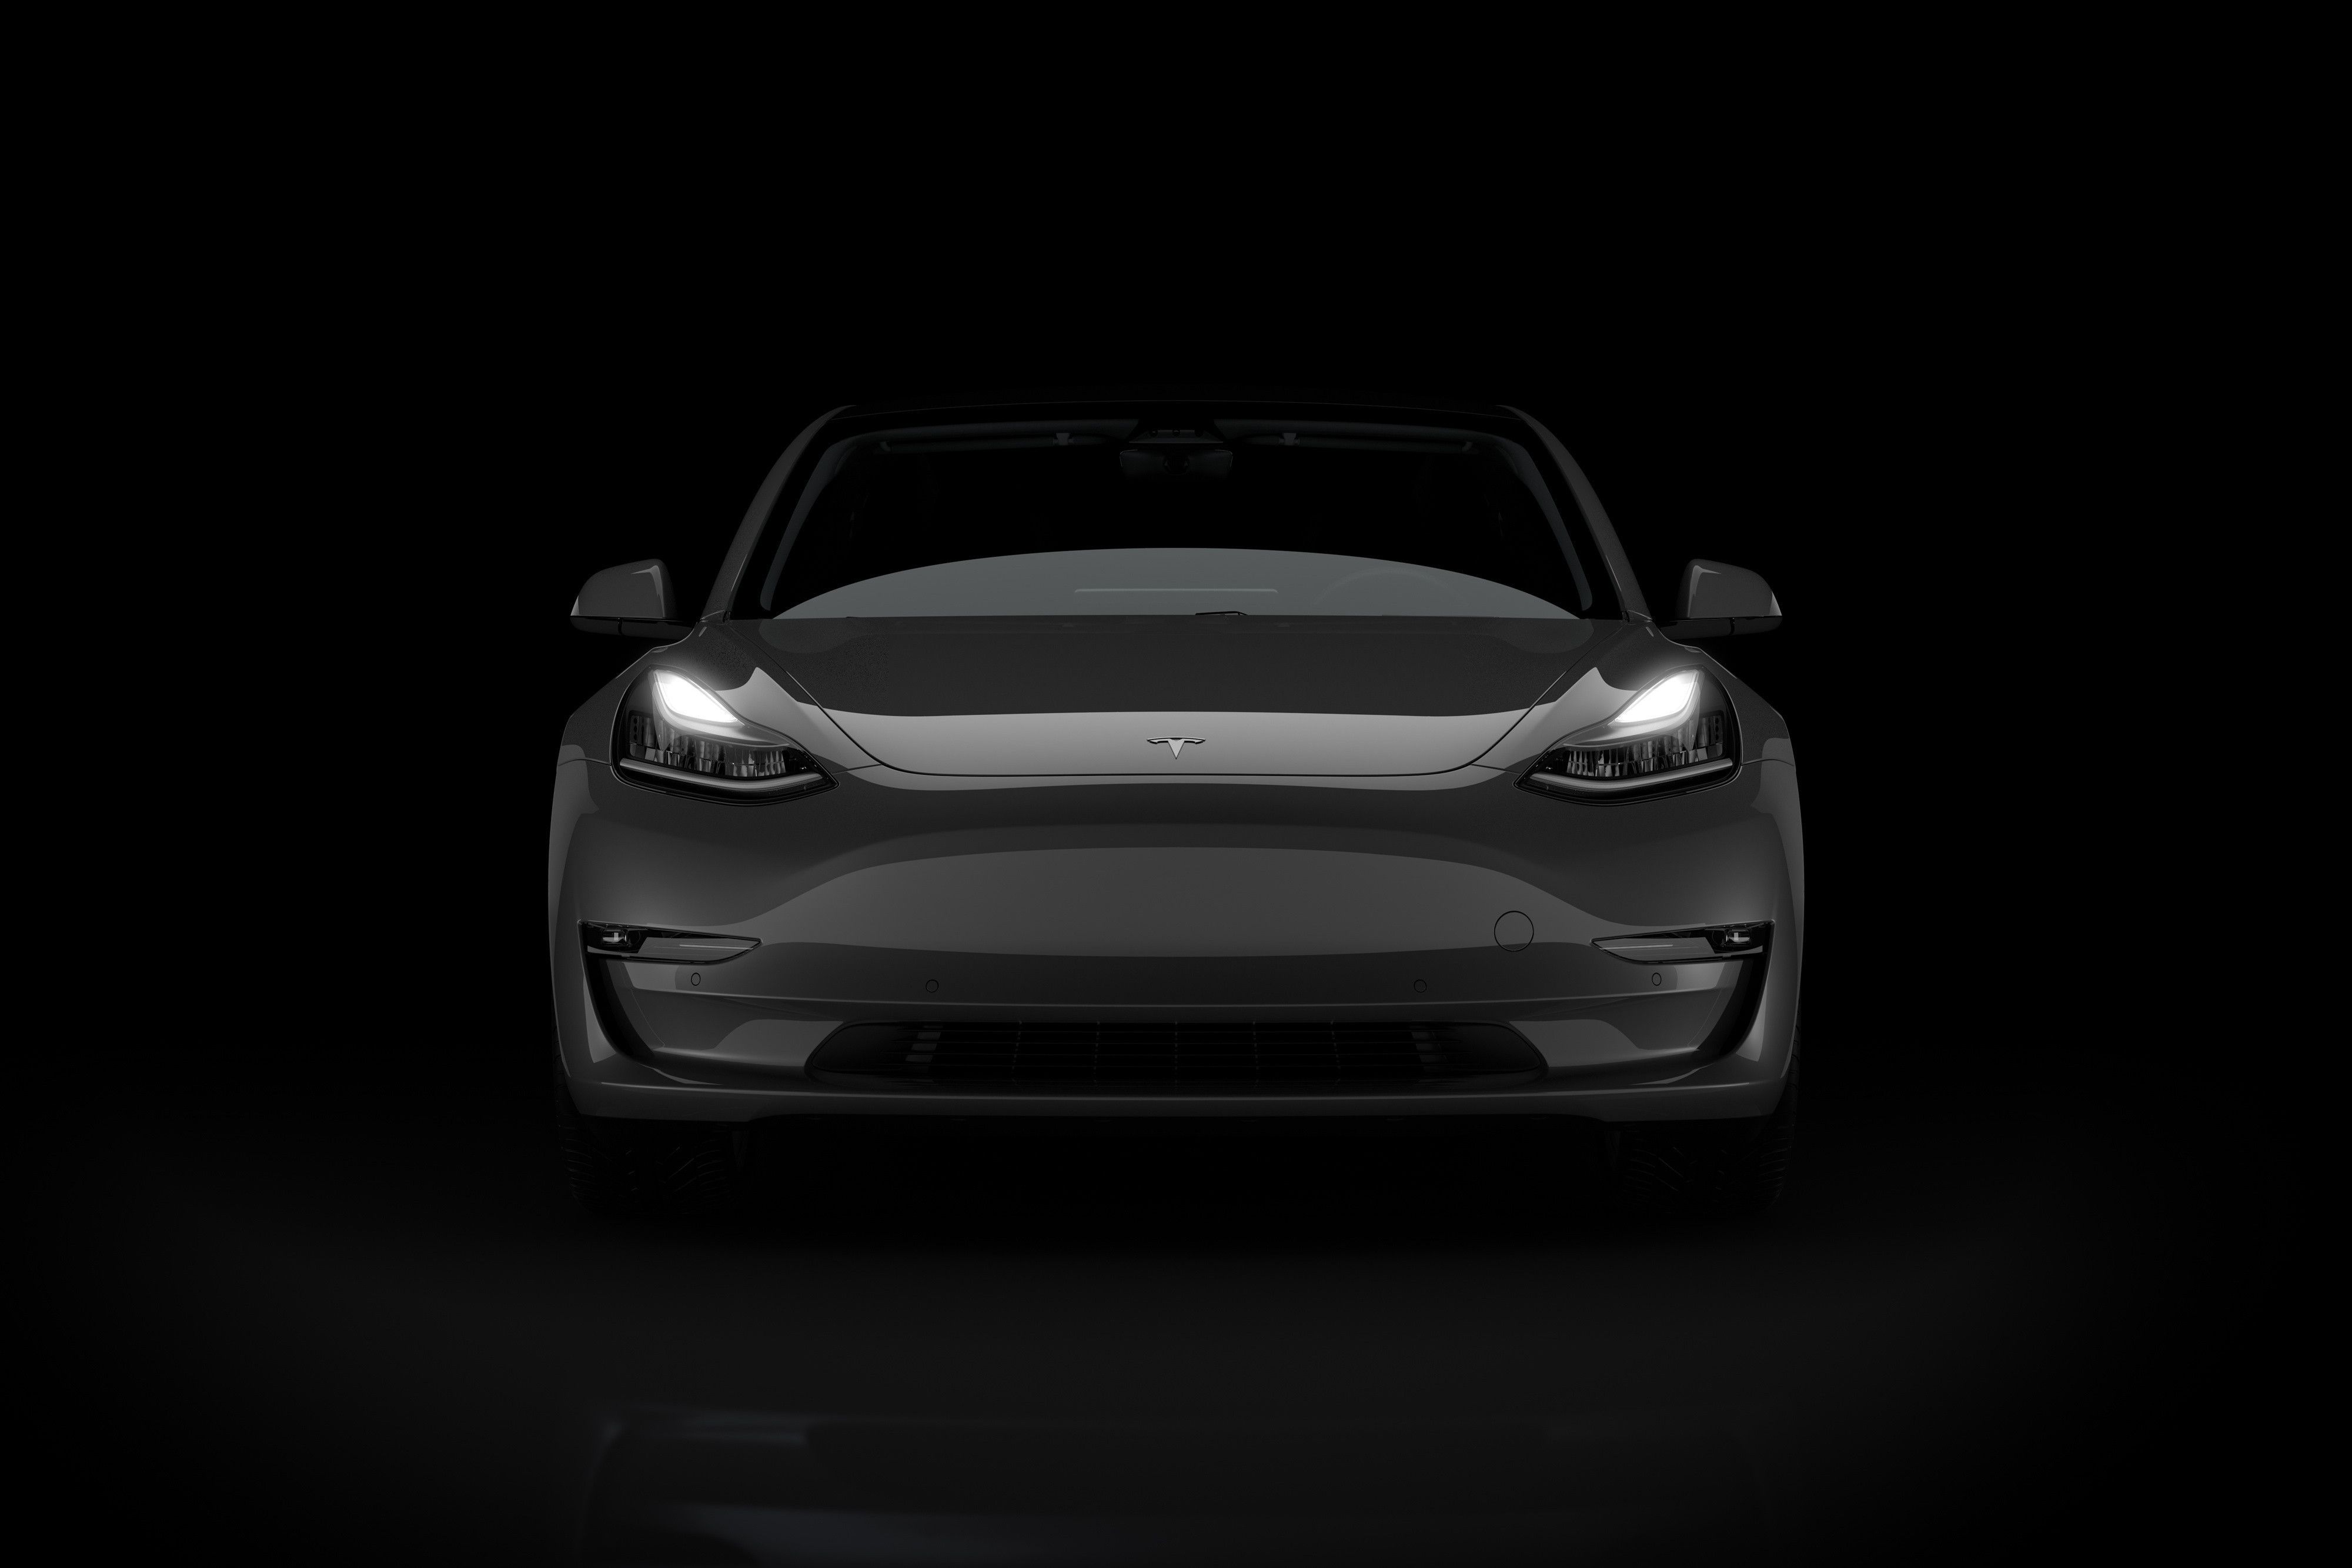 An Updated Tesla Model 3 Is Coming and Will Be Plainer: Report